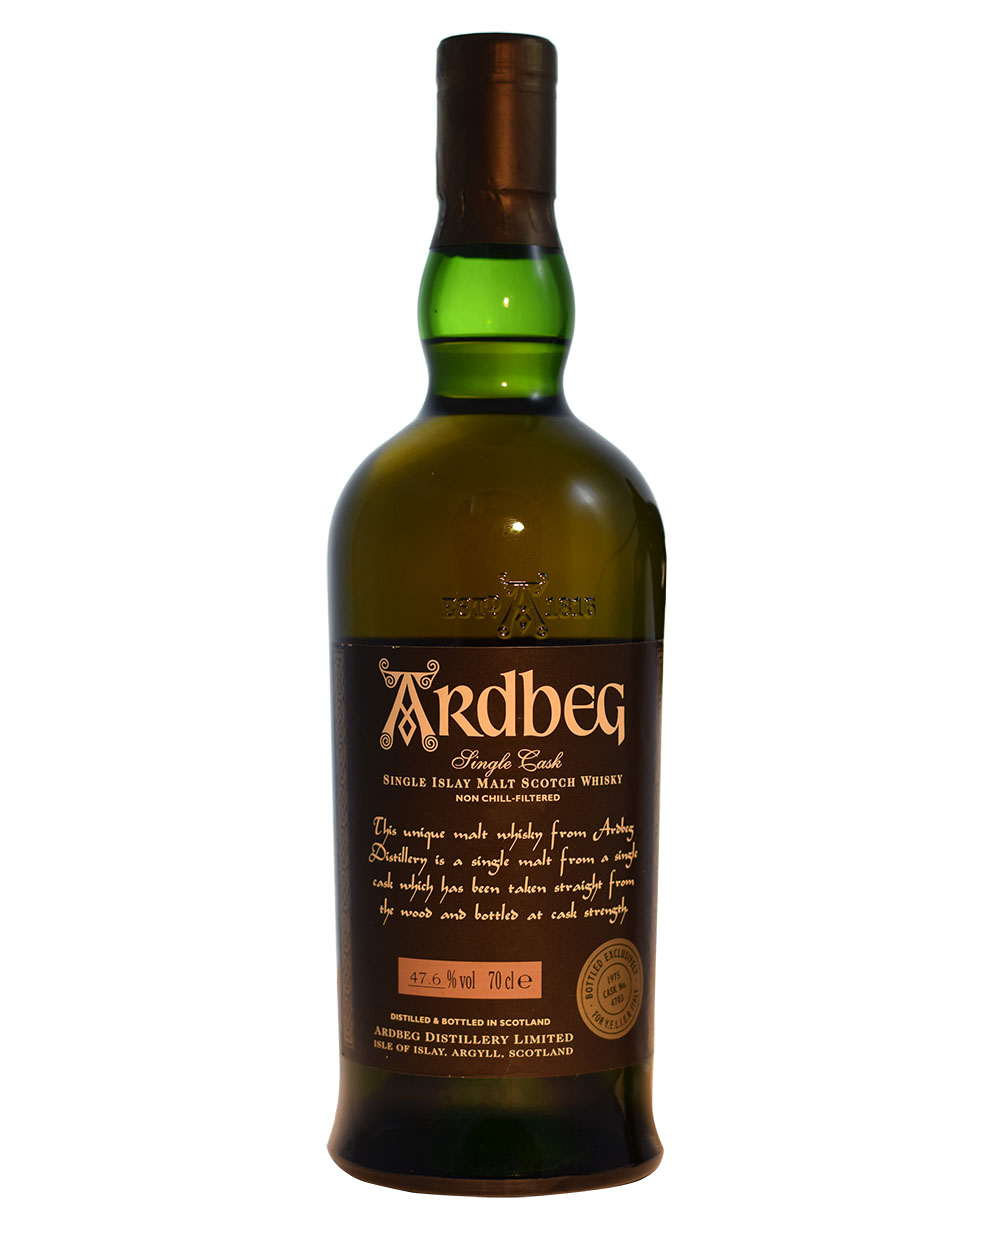 Ardbeg 1975 Cask 4704 (26 Years Old) MusthaveMalts MHM